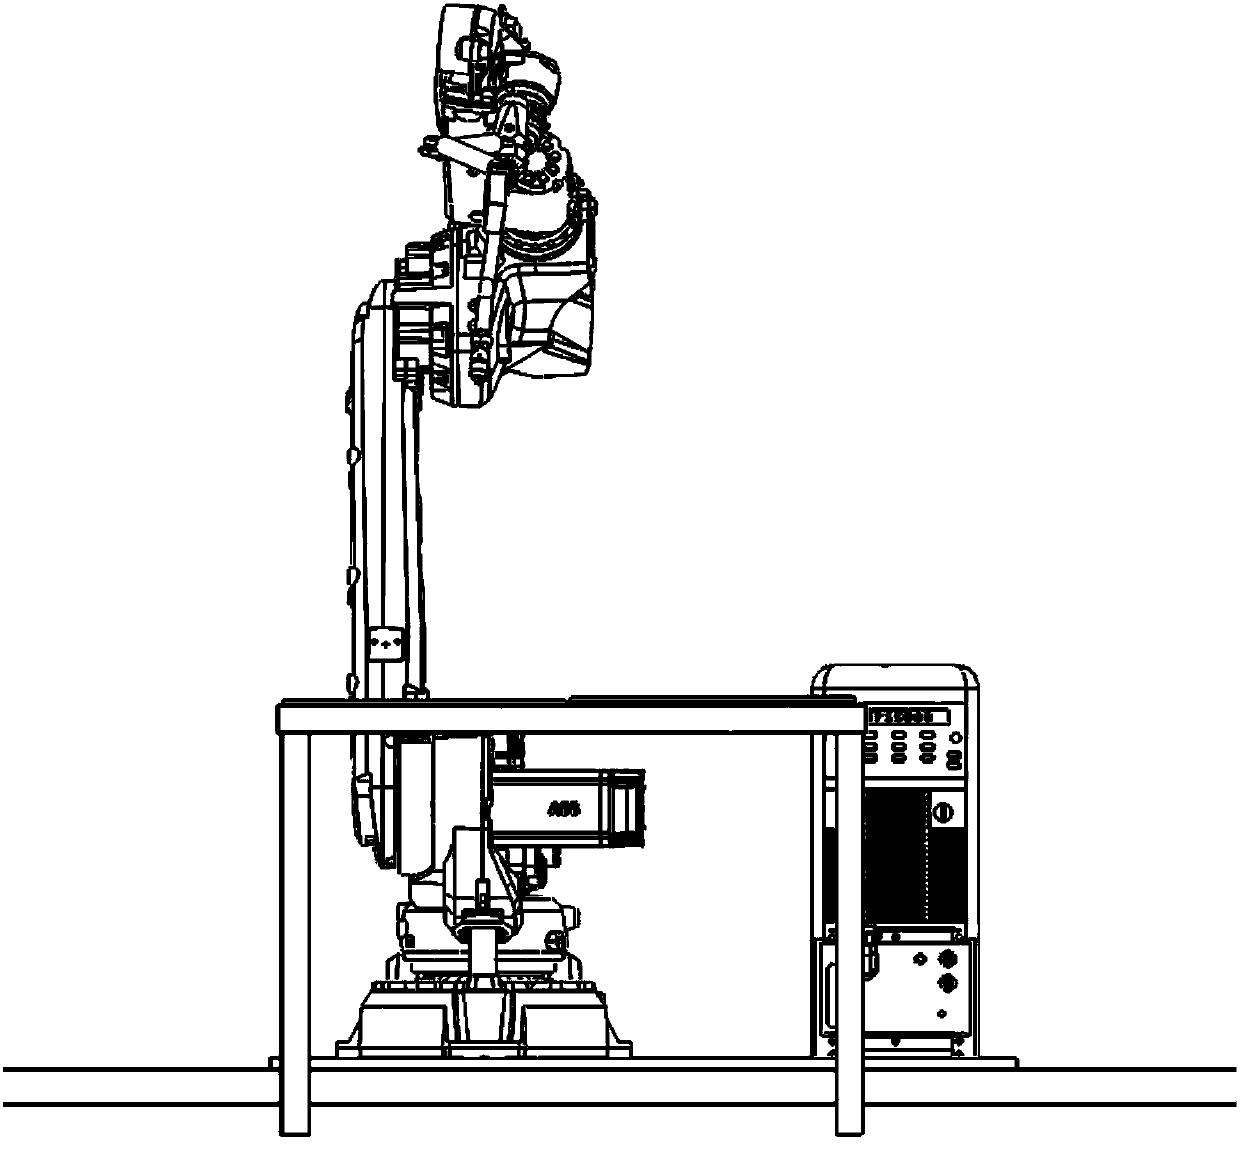 Robot automatic-welding device for single-face welding and dual-face forming of unequal-interval work piece